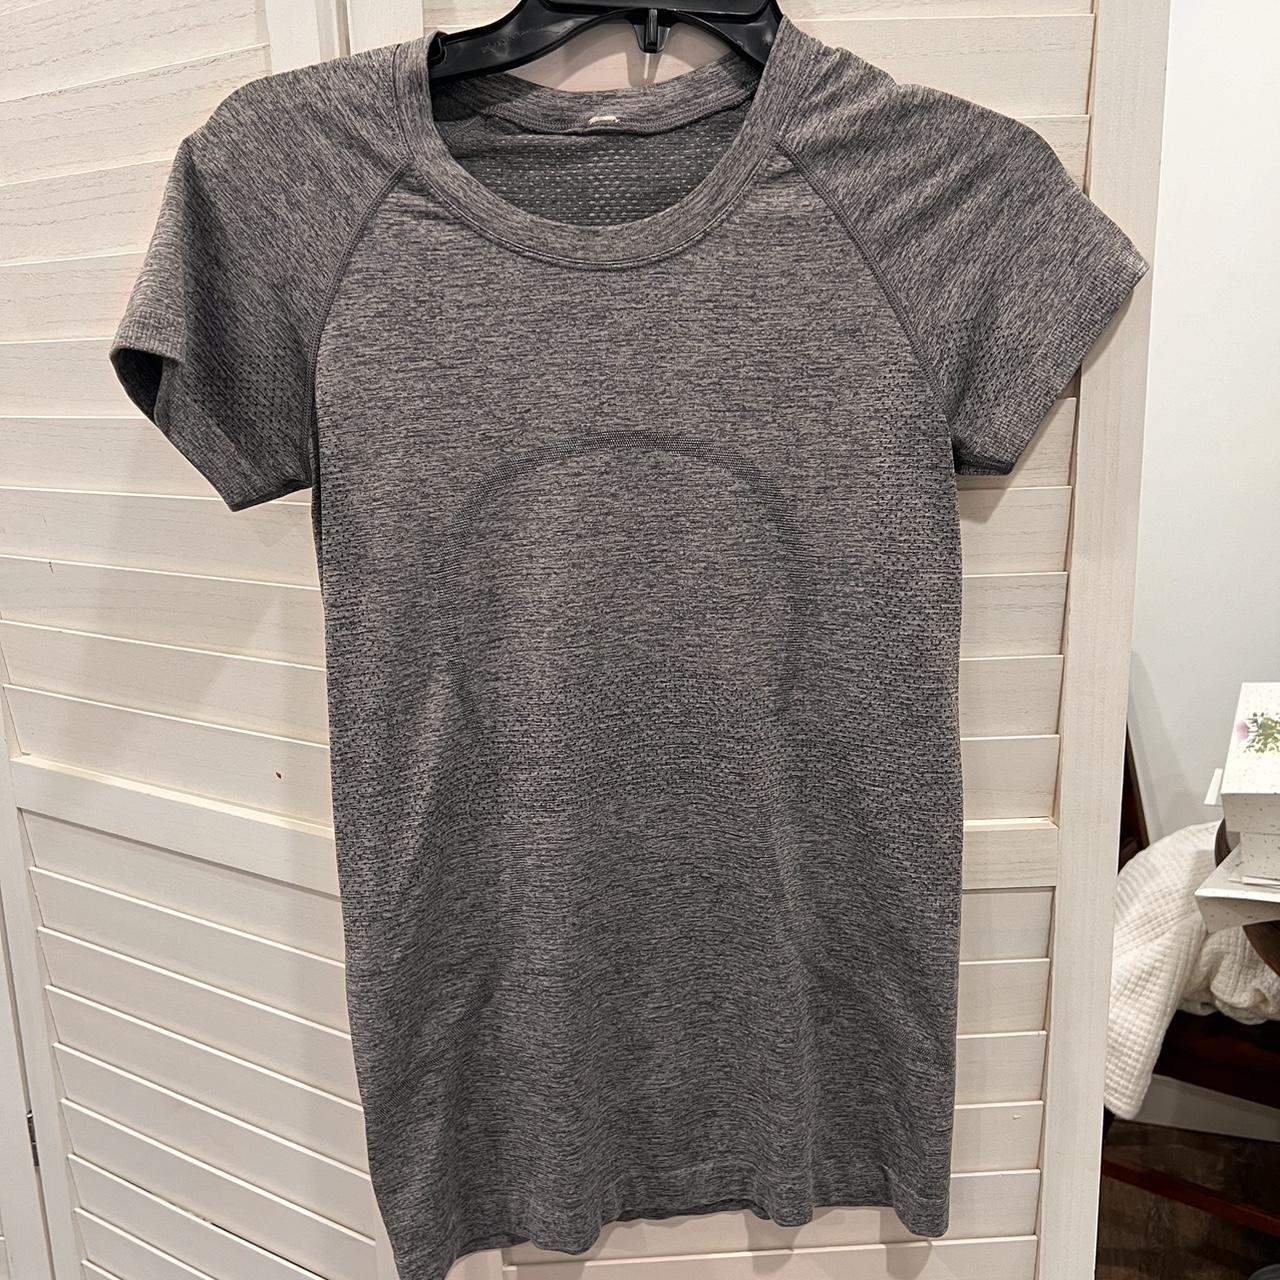 BRAND NEW just without tags - lululemon shirt... - Depop